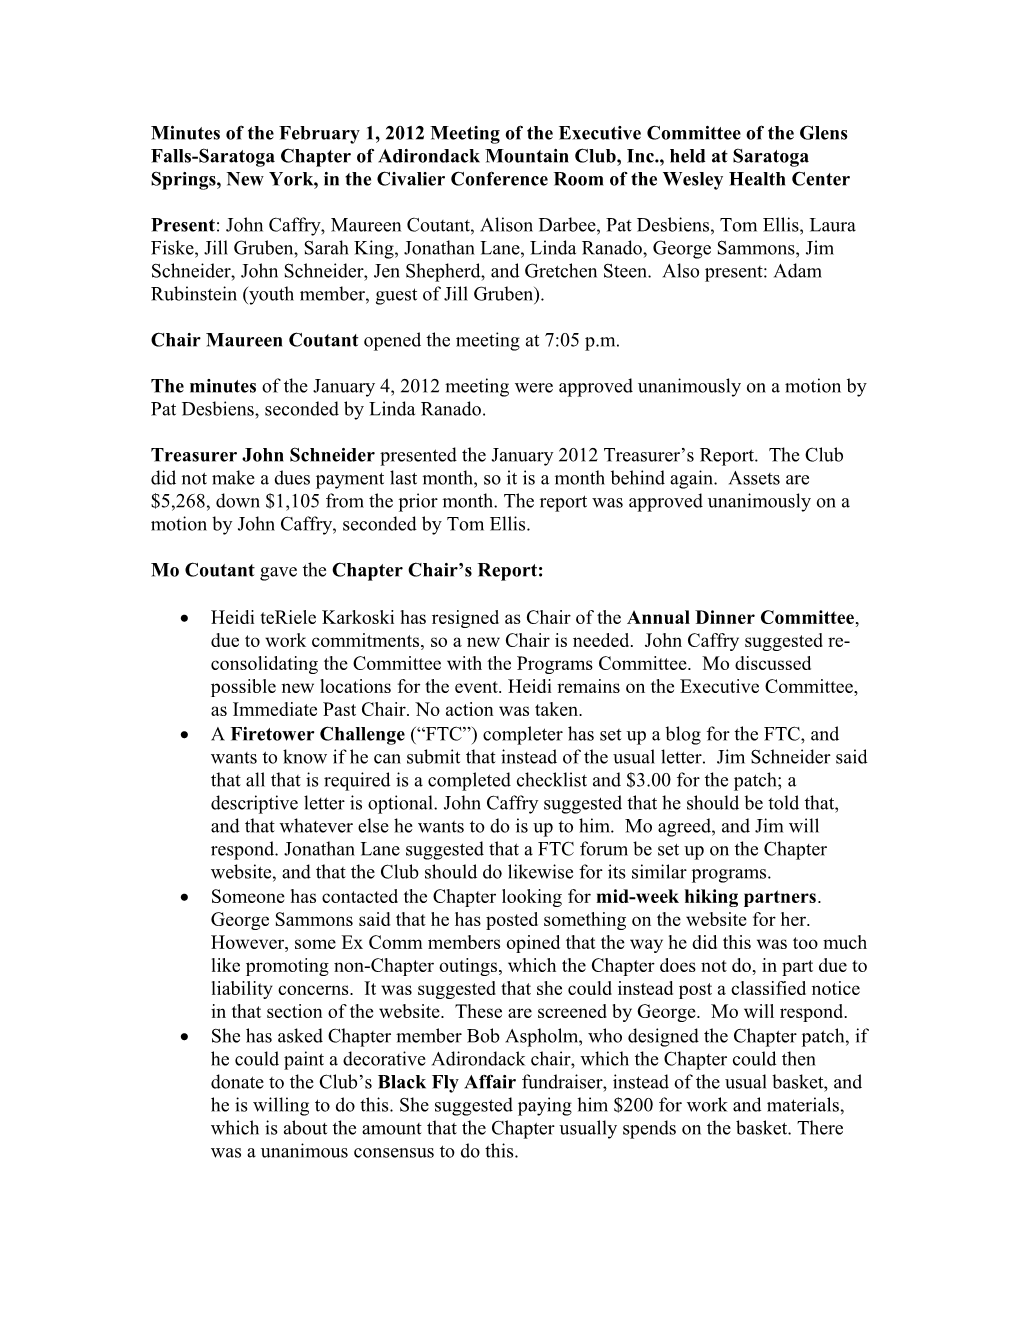 Minutes of Thefebruary 1, 2012 Meeting of the Executive Committee of the Glens Falls-Saratoga